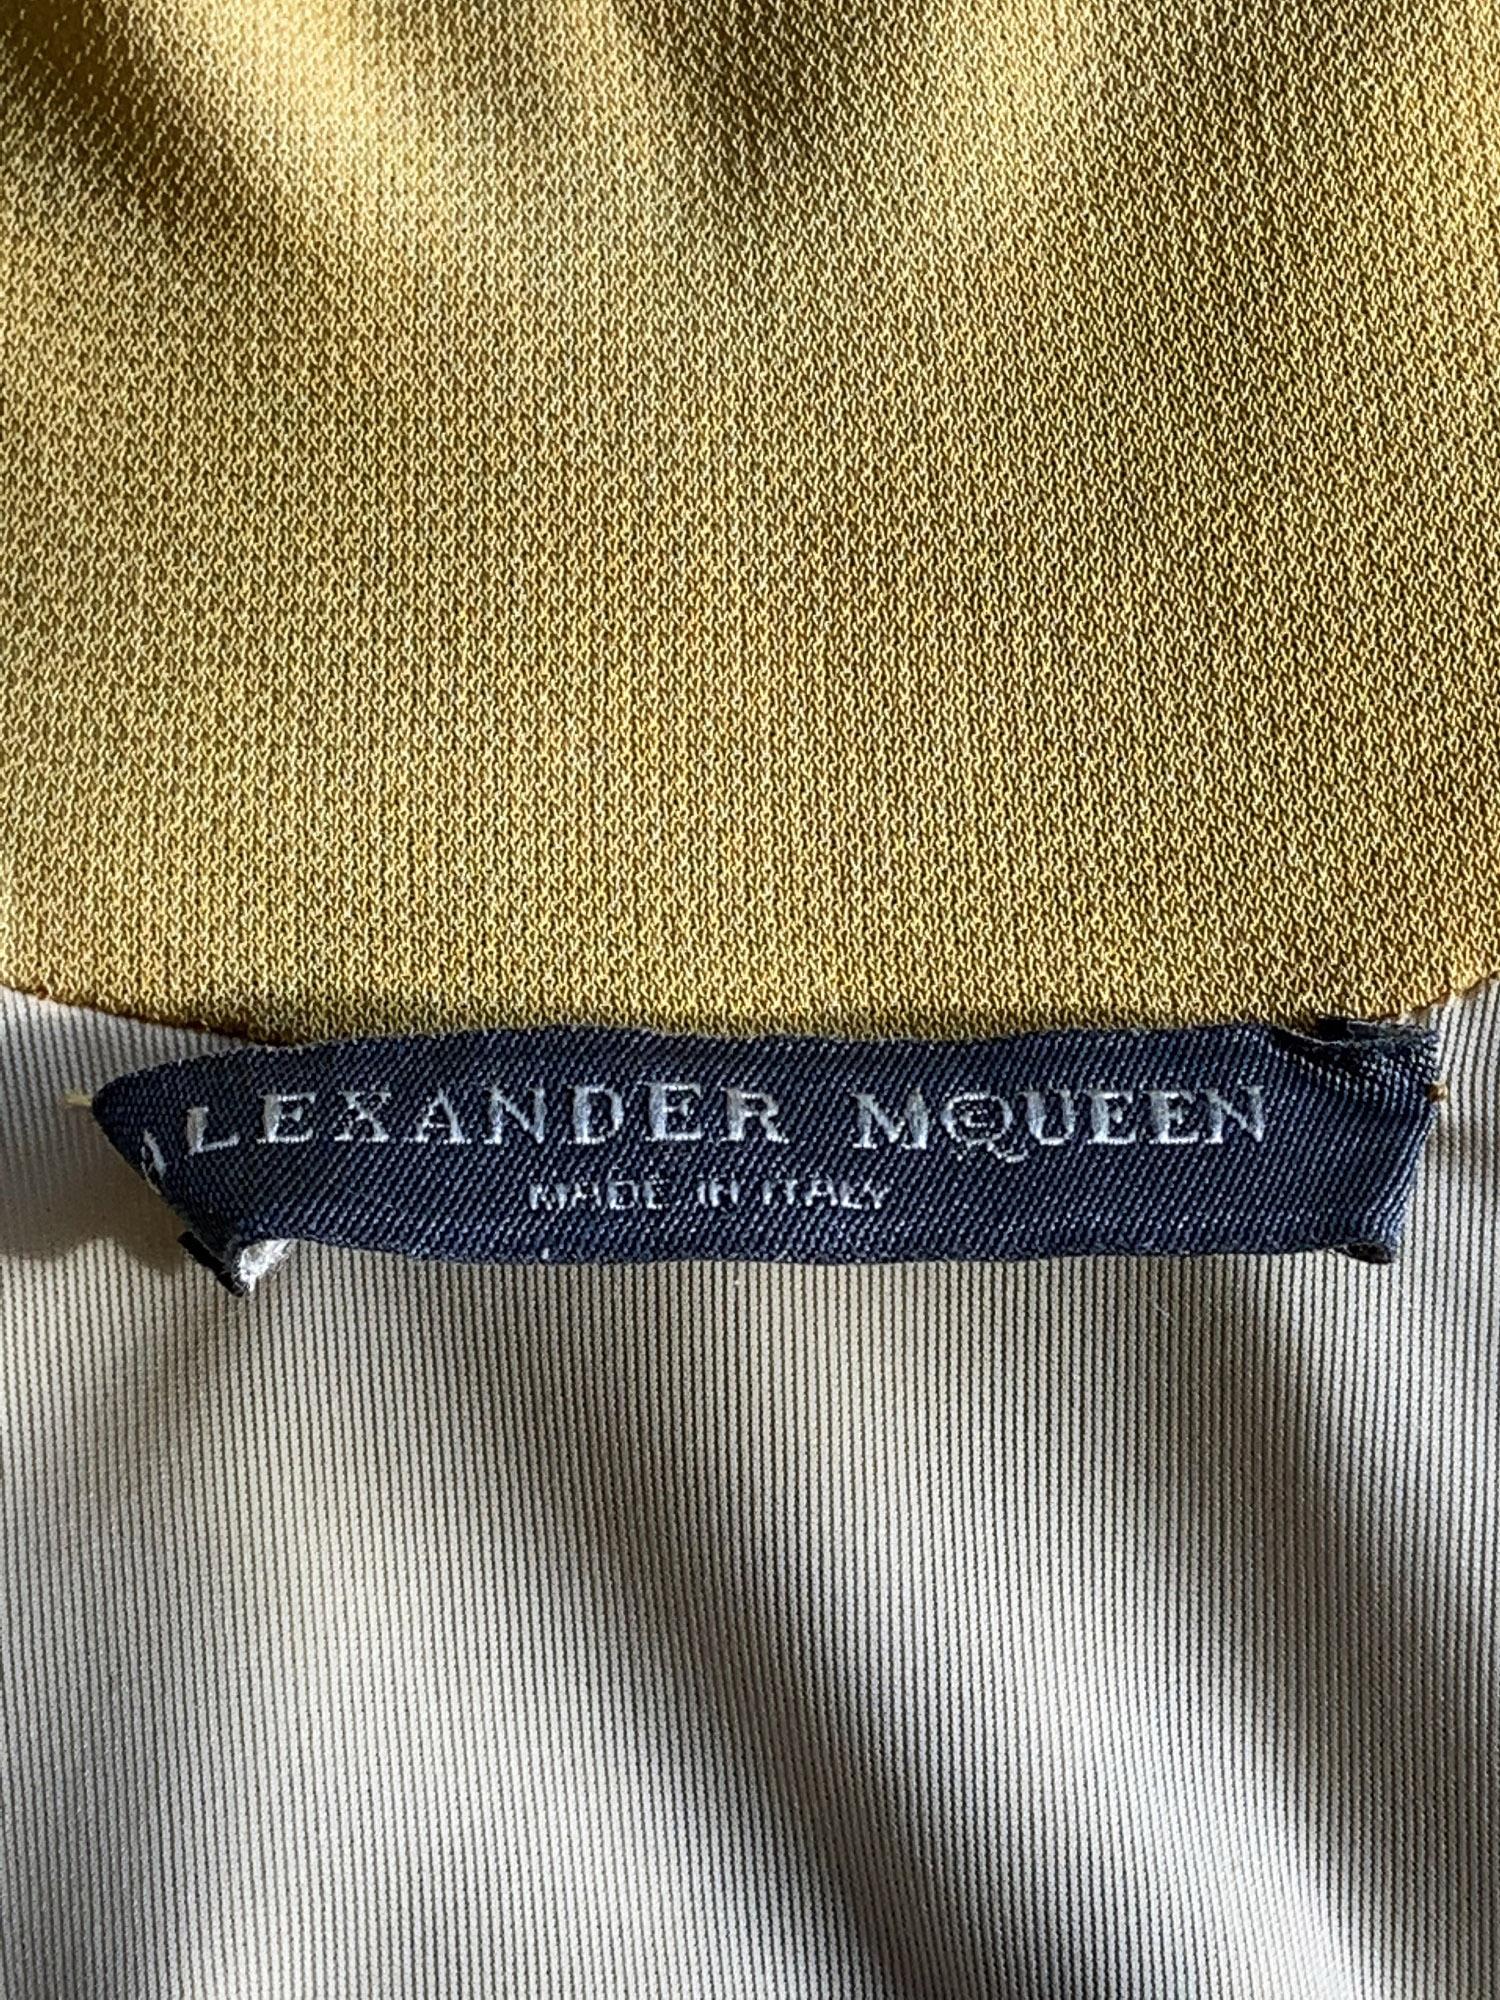 Alexander McQueen SS 2010 Plato's Atlantis Collection Stretch Open Back Dress 40 In Excellent Condition For Sale In Montgomery, TX